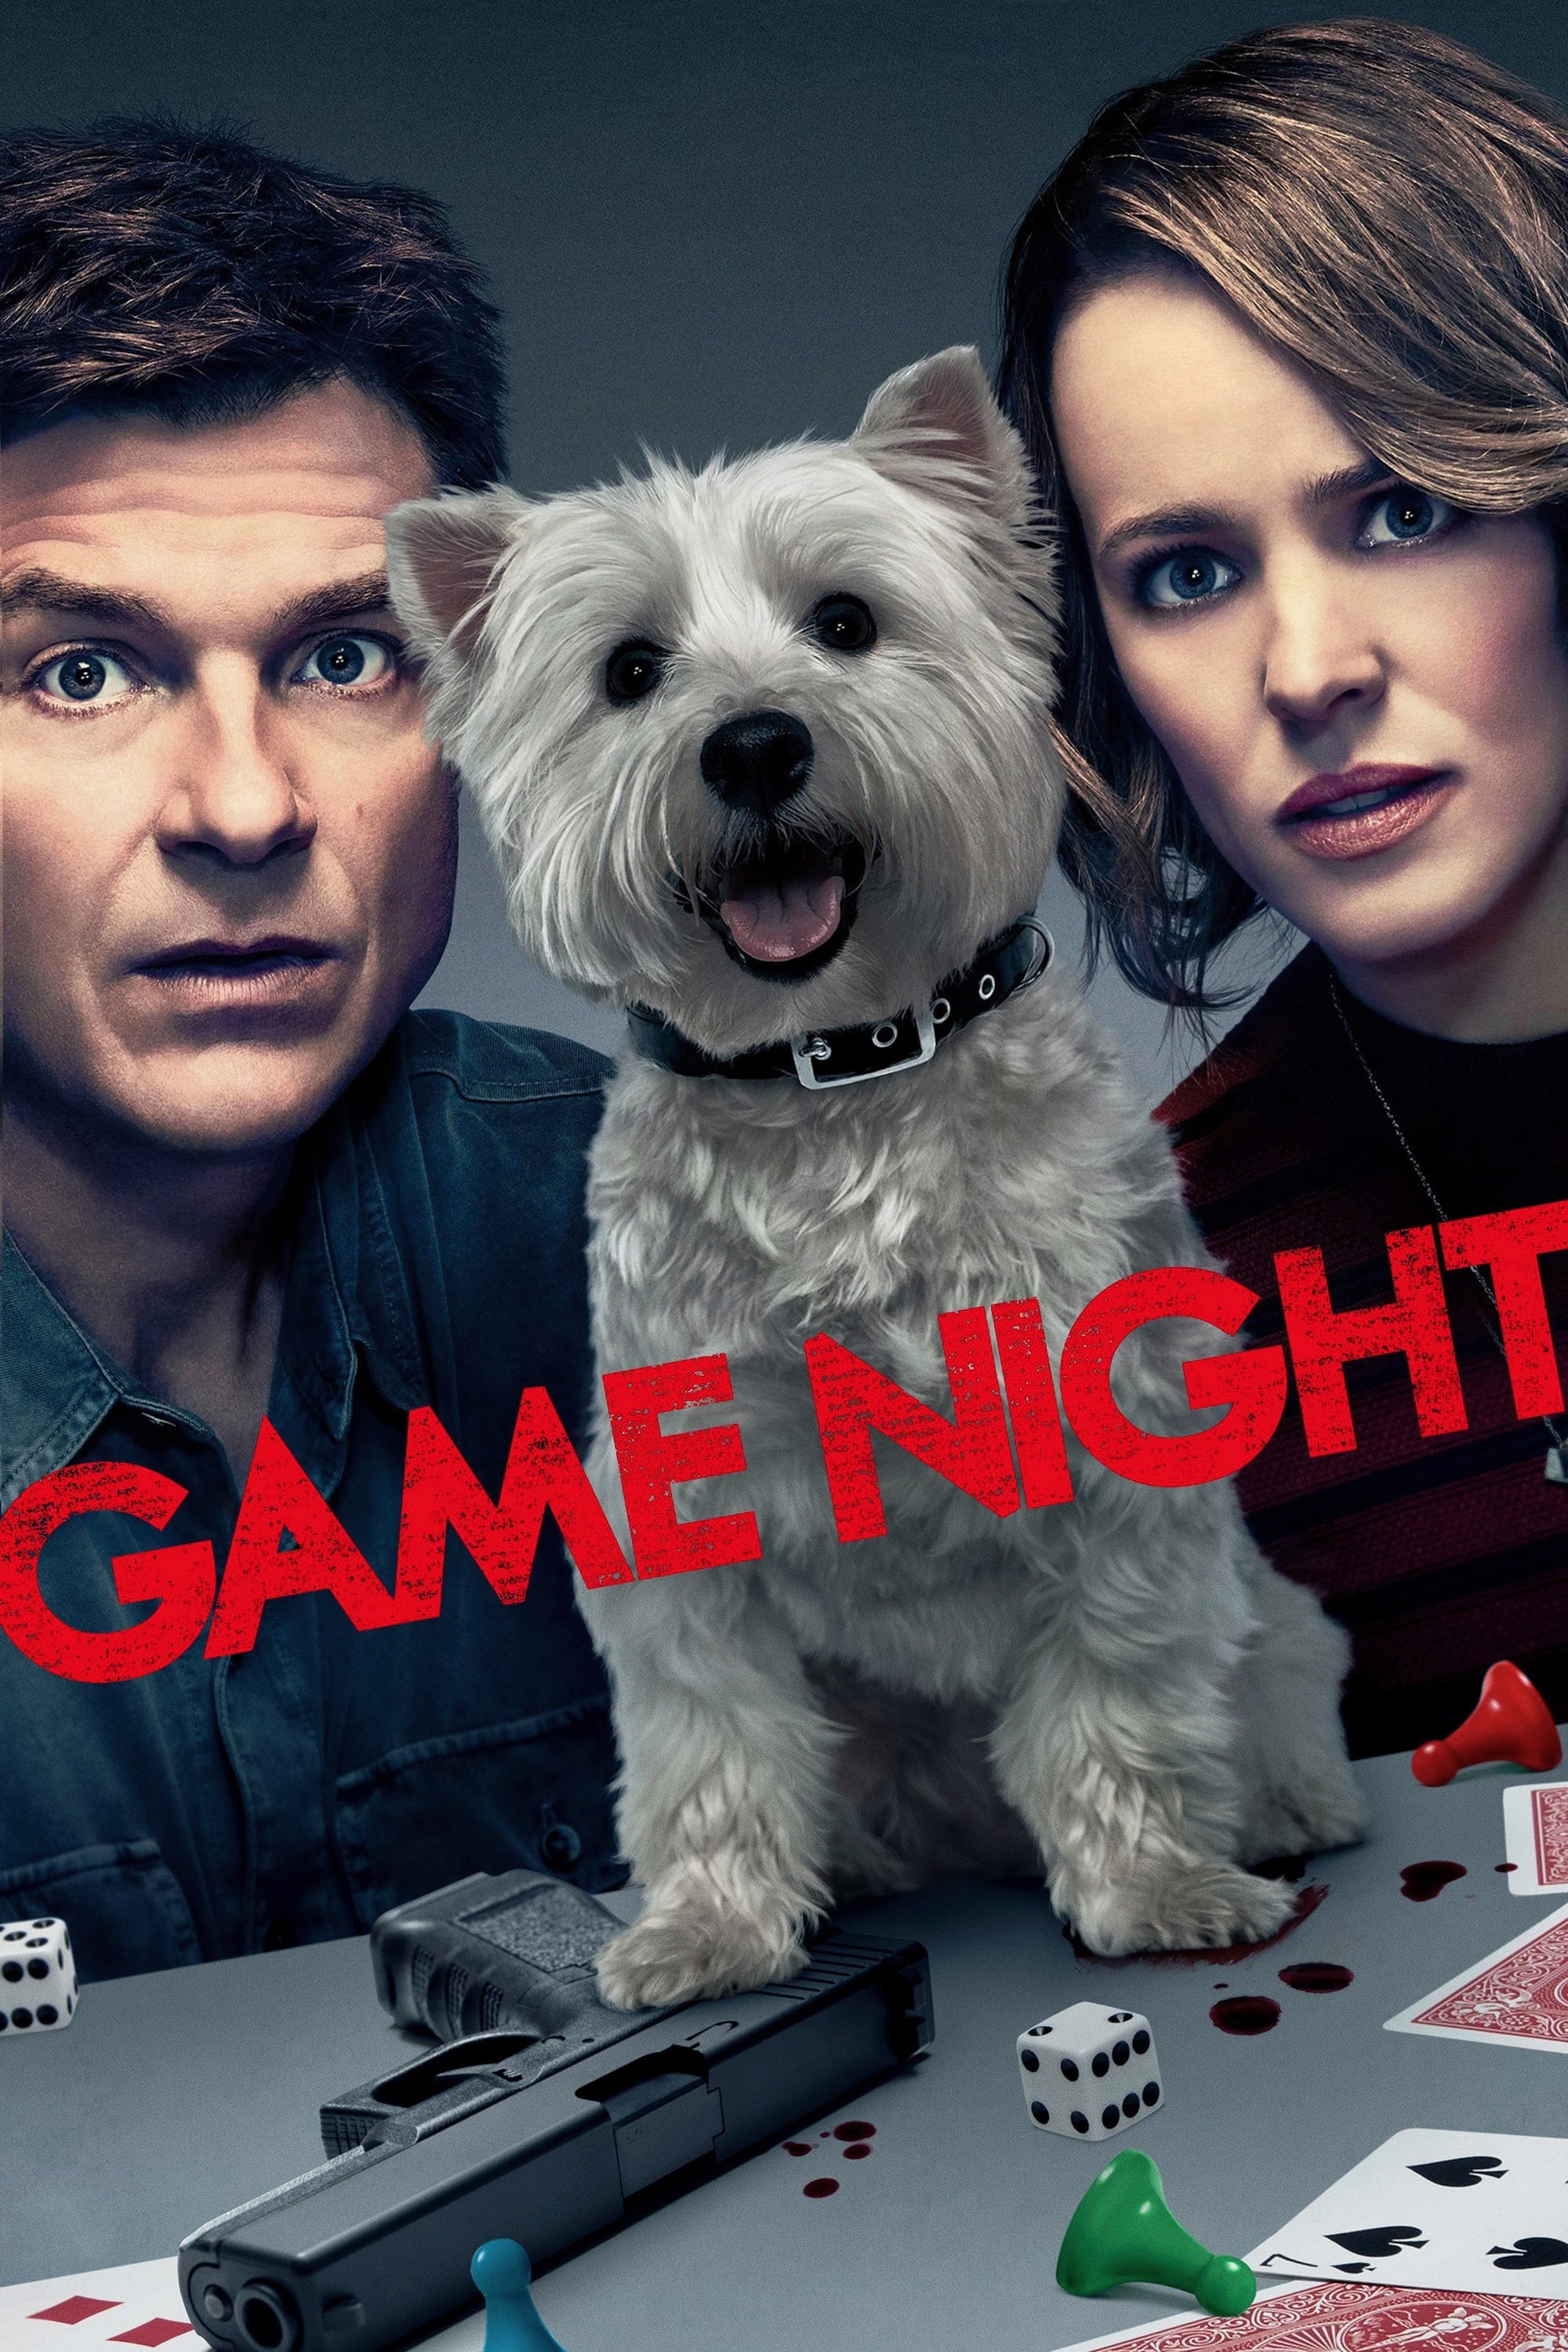 Hilarious comedy, Exciting game night, Posters with flair, Entertainment flick, 2000x3000 HD Handy